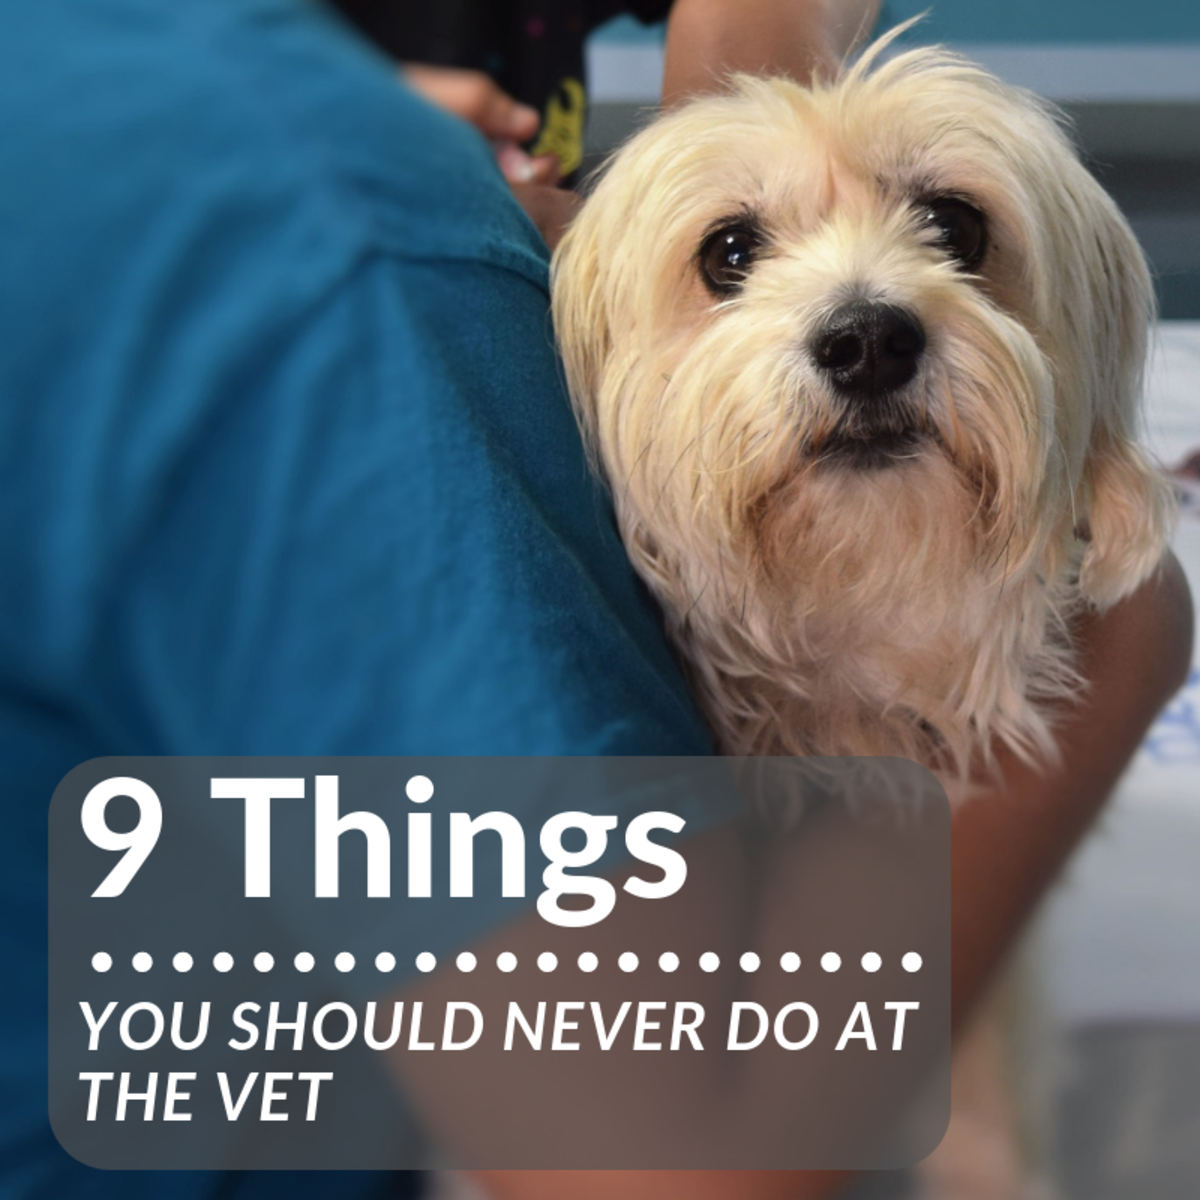 9 Things You Should Never Do at a Veterinary Clinic